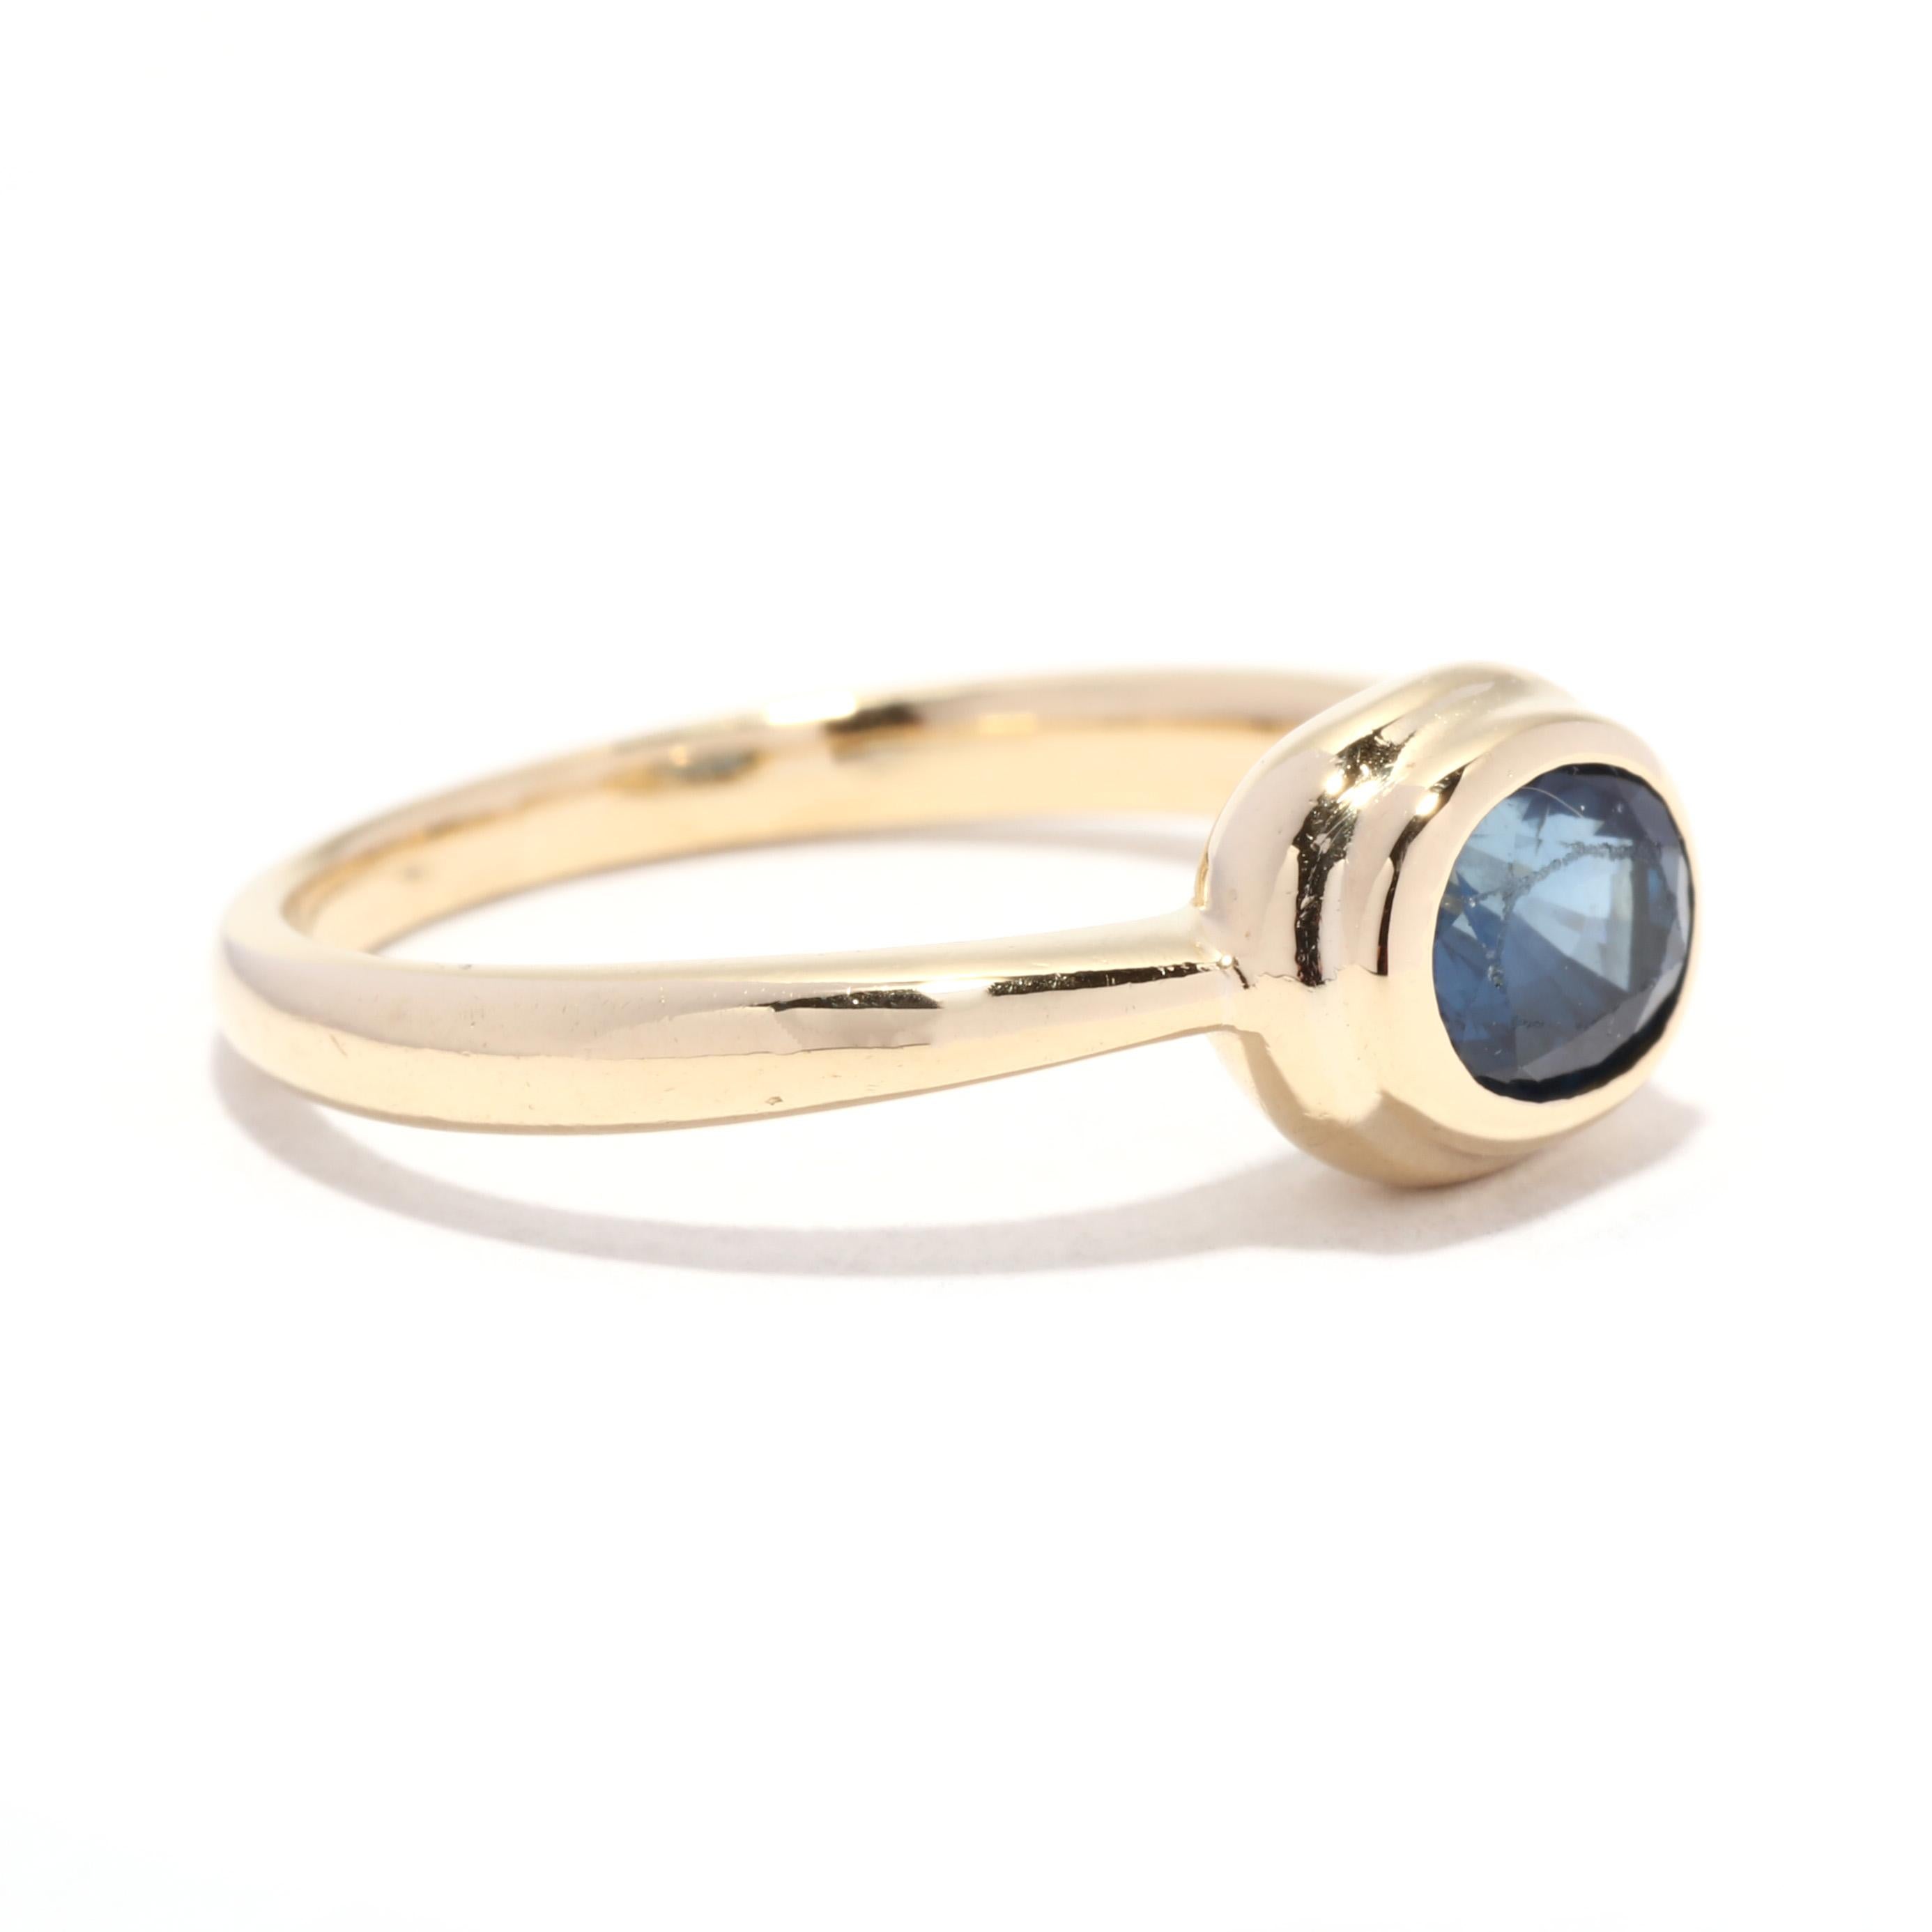 A vintage 18 karat yellow gold natural sapphire engagement ring. This September birthstone ring features a horizontal bezel set, oval cut sapphire weighing approximately 1.16 carat and with a tapered band.

Stones:
- sapphire, 1 stone
- oval cut
-